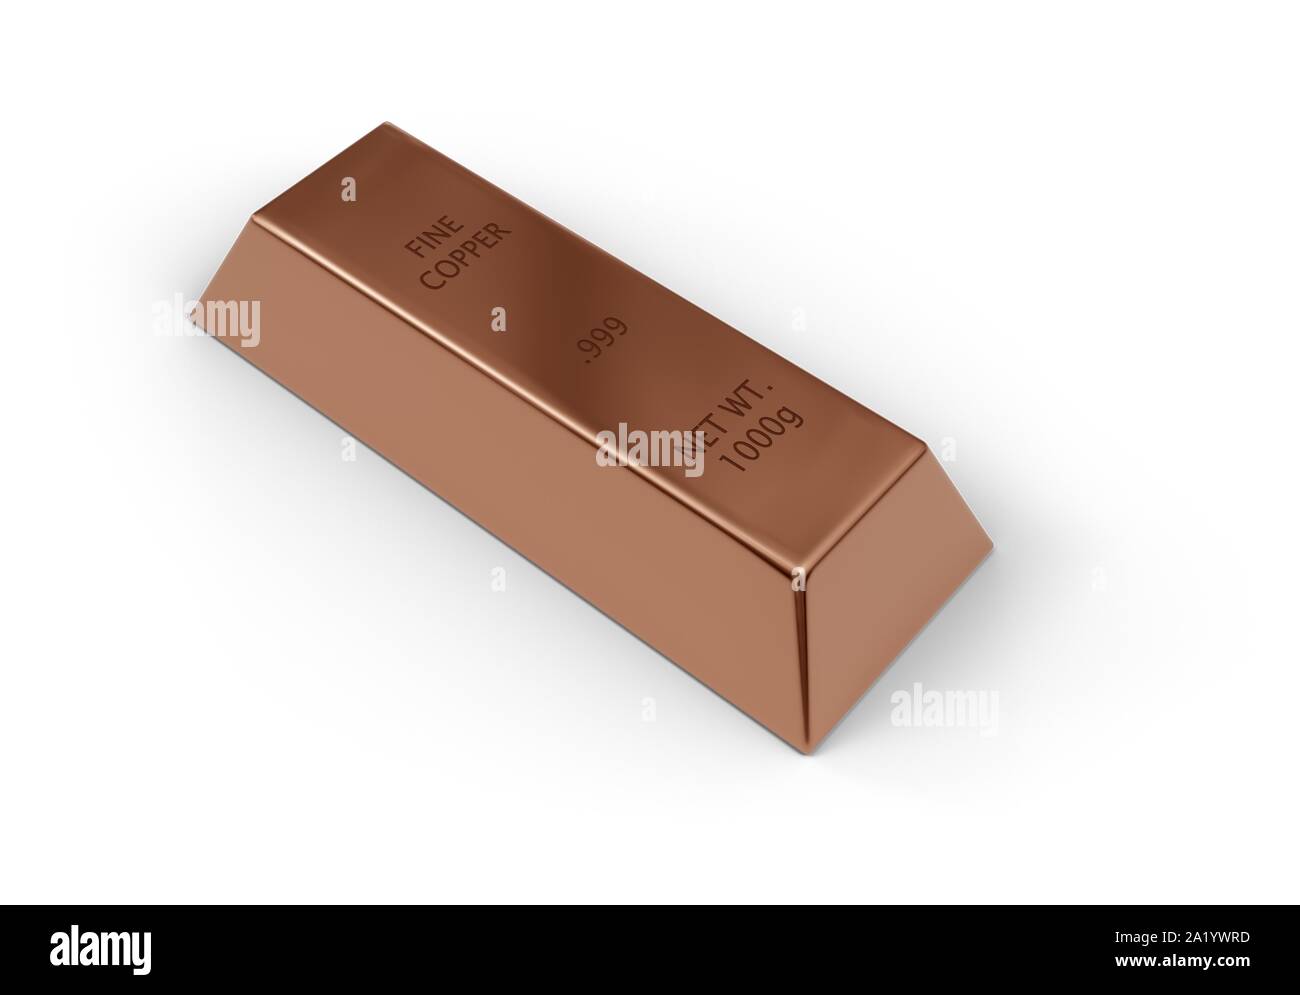 Shiny copper ingot or bar over white background - essential